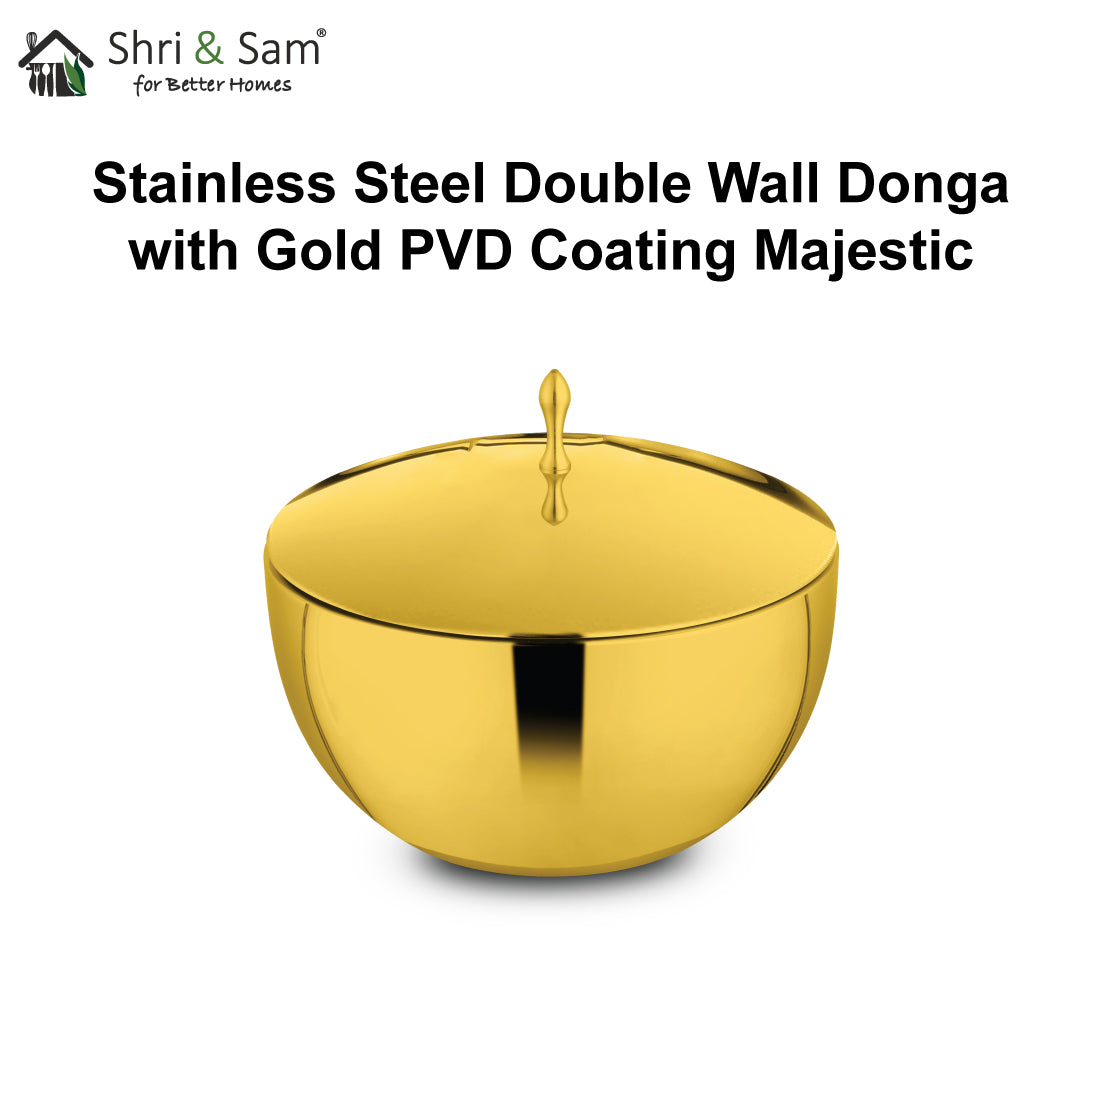 Stainless Steel Double Wall Donga with Gold PVD Coating Majestic